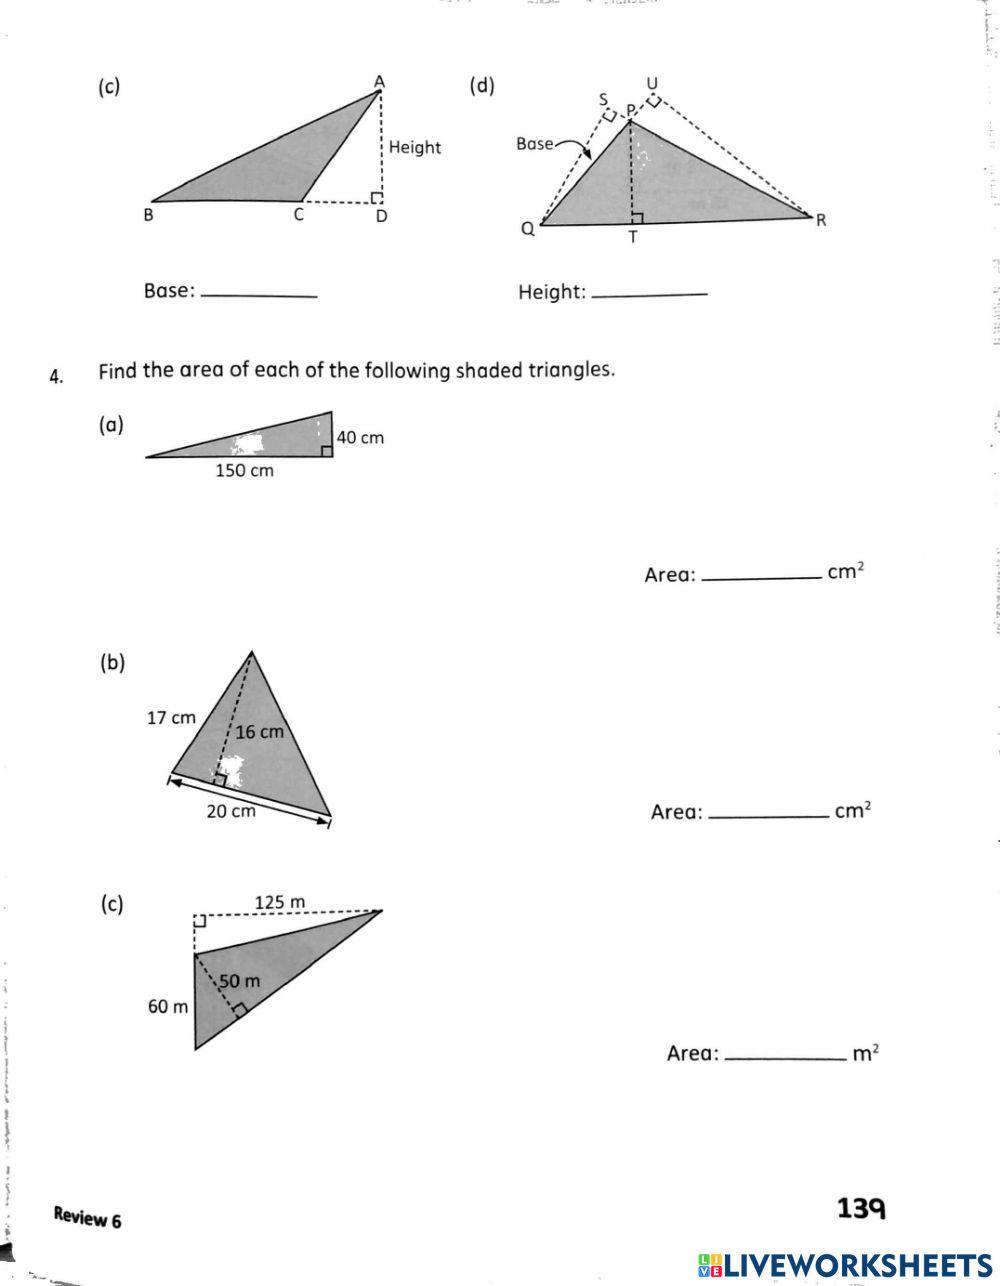 5B Review 6